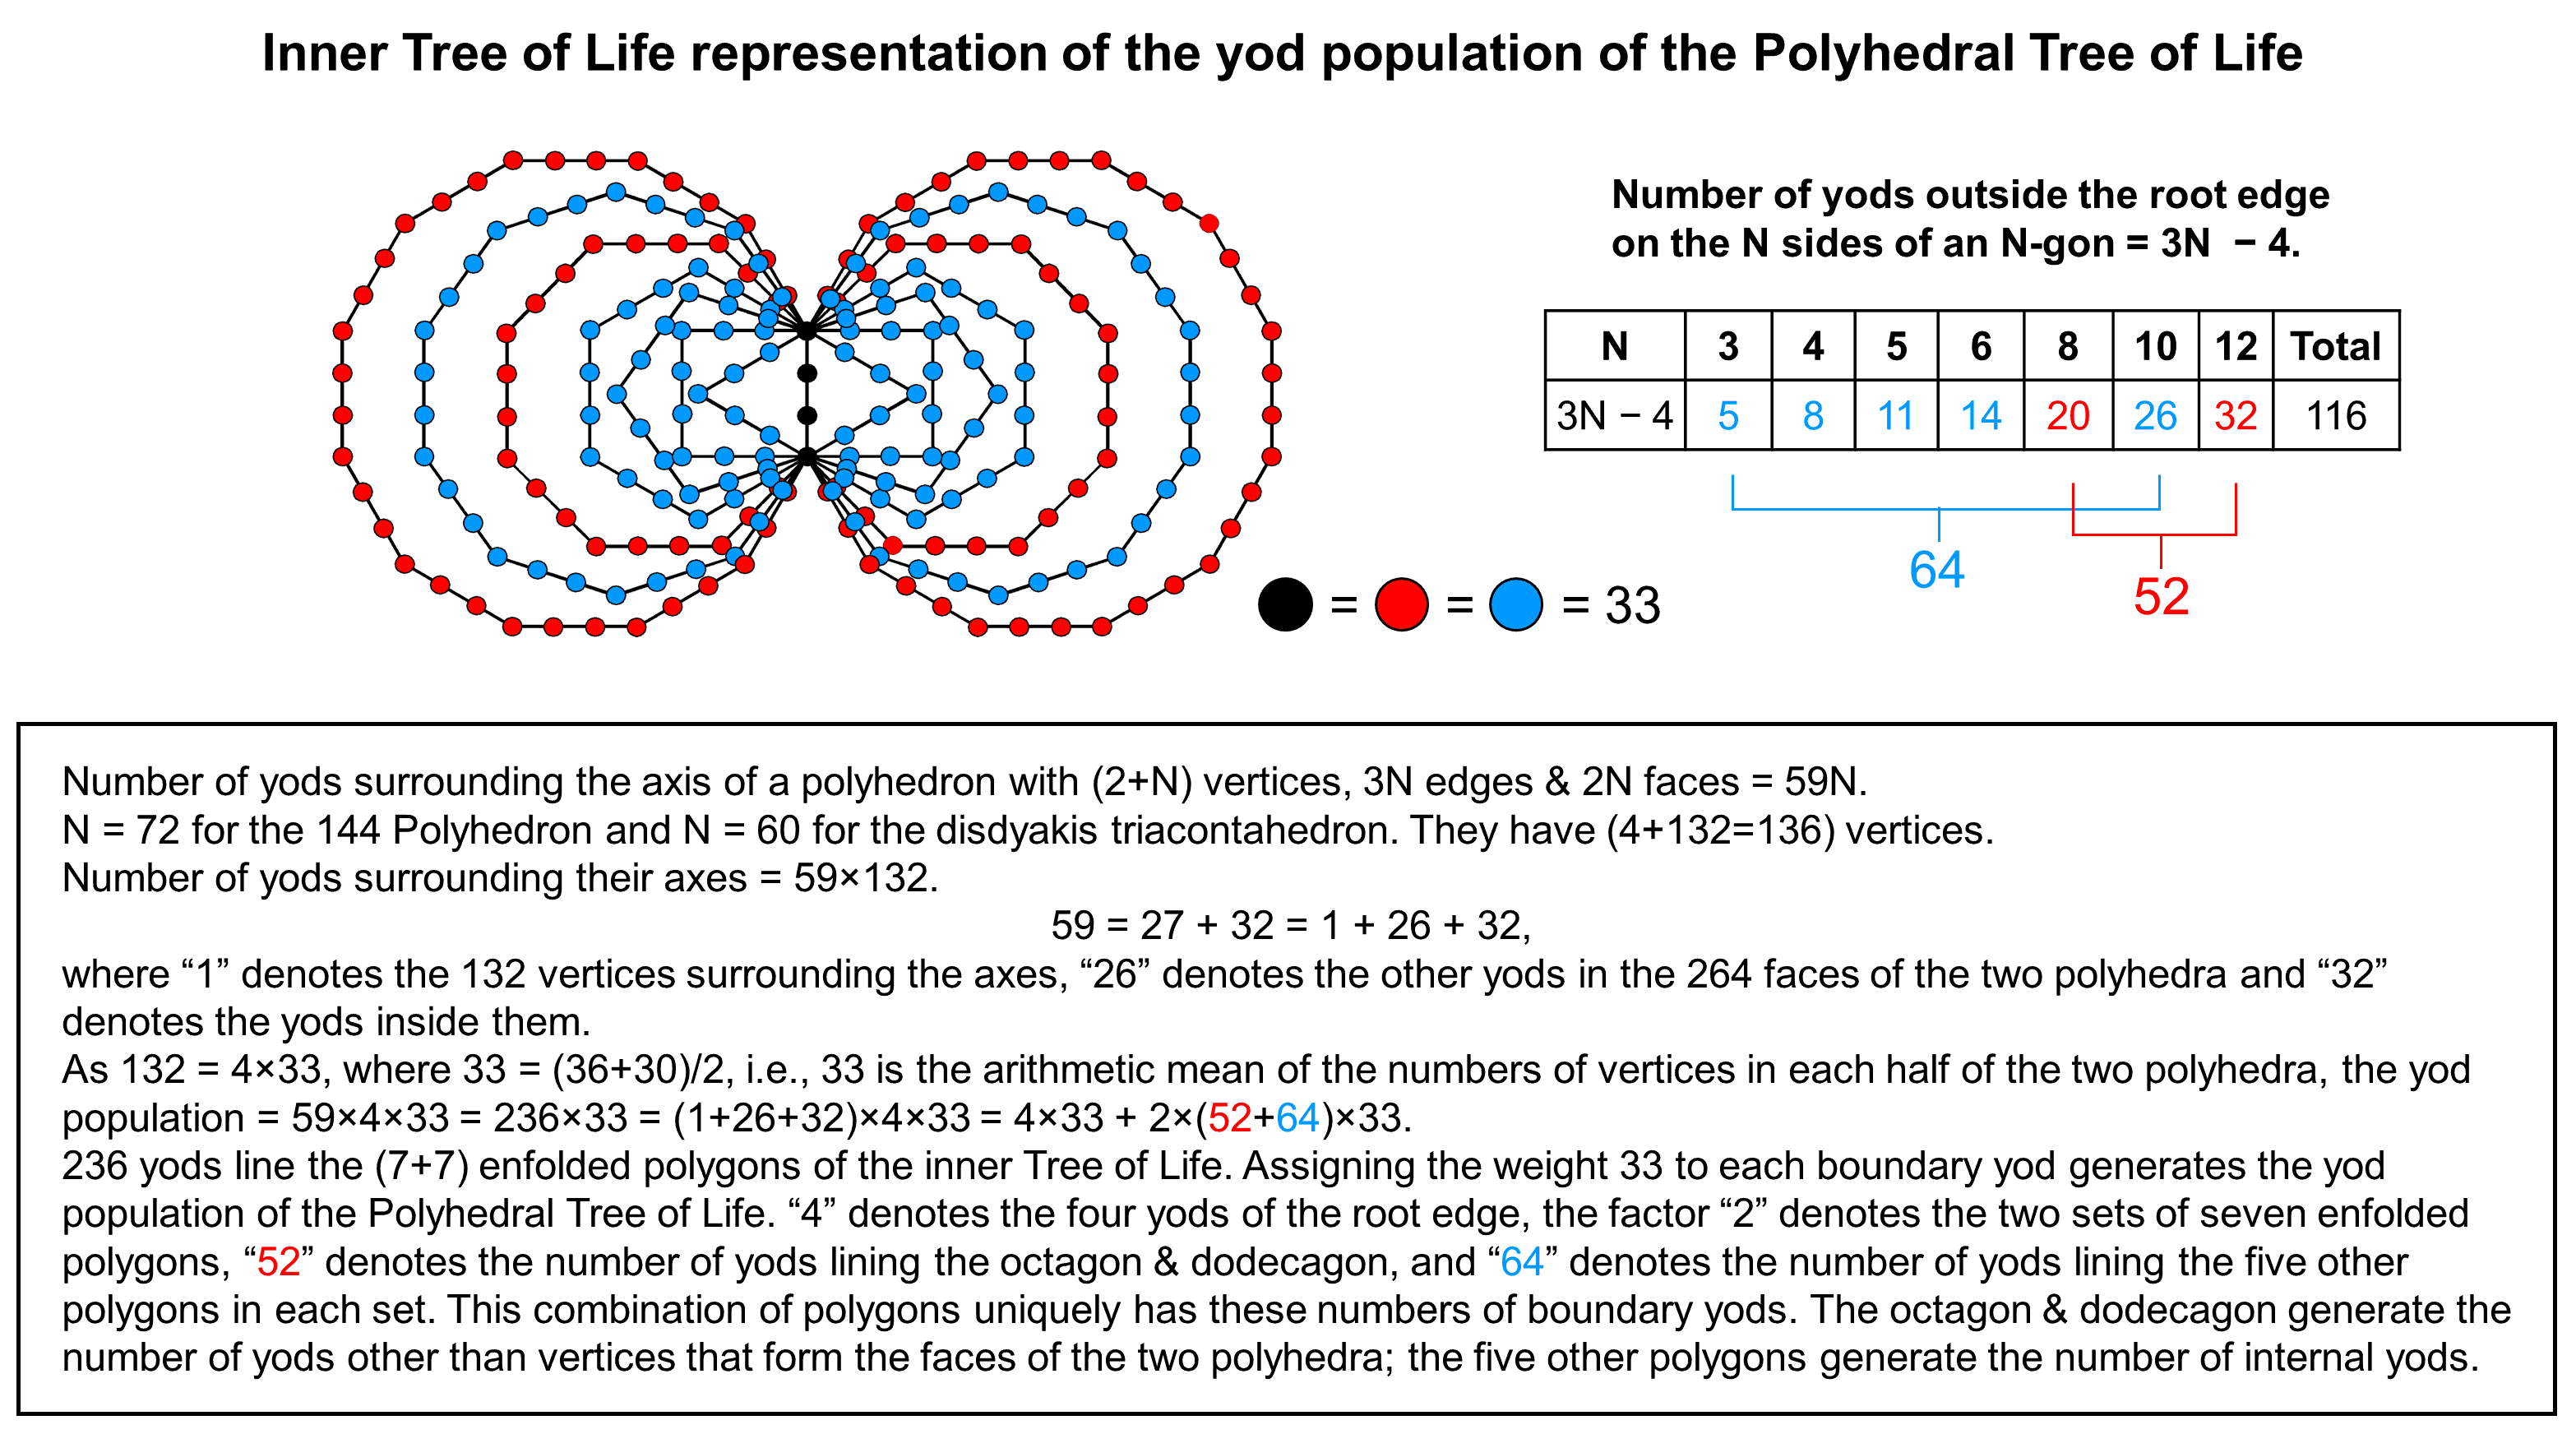 Inner Tree of Life representation of yod population of Polyhedral Tree of Life